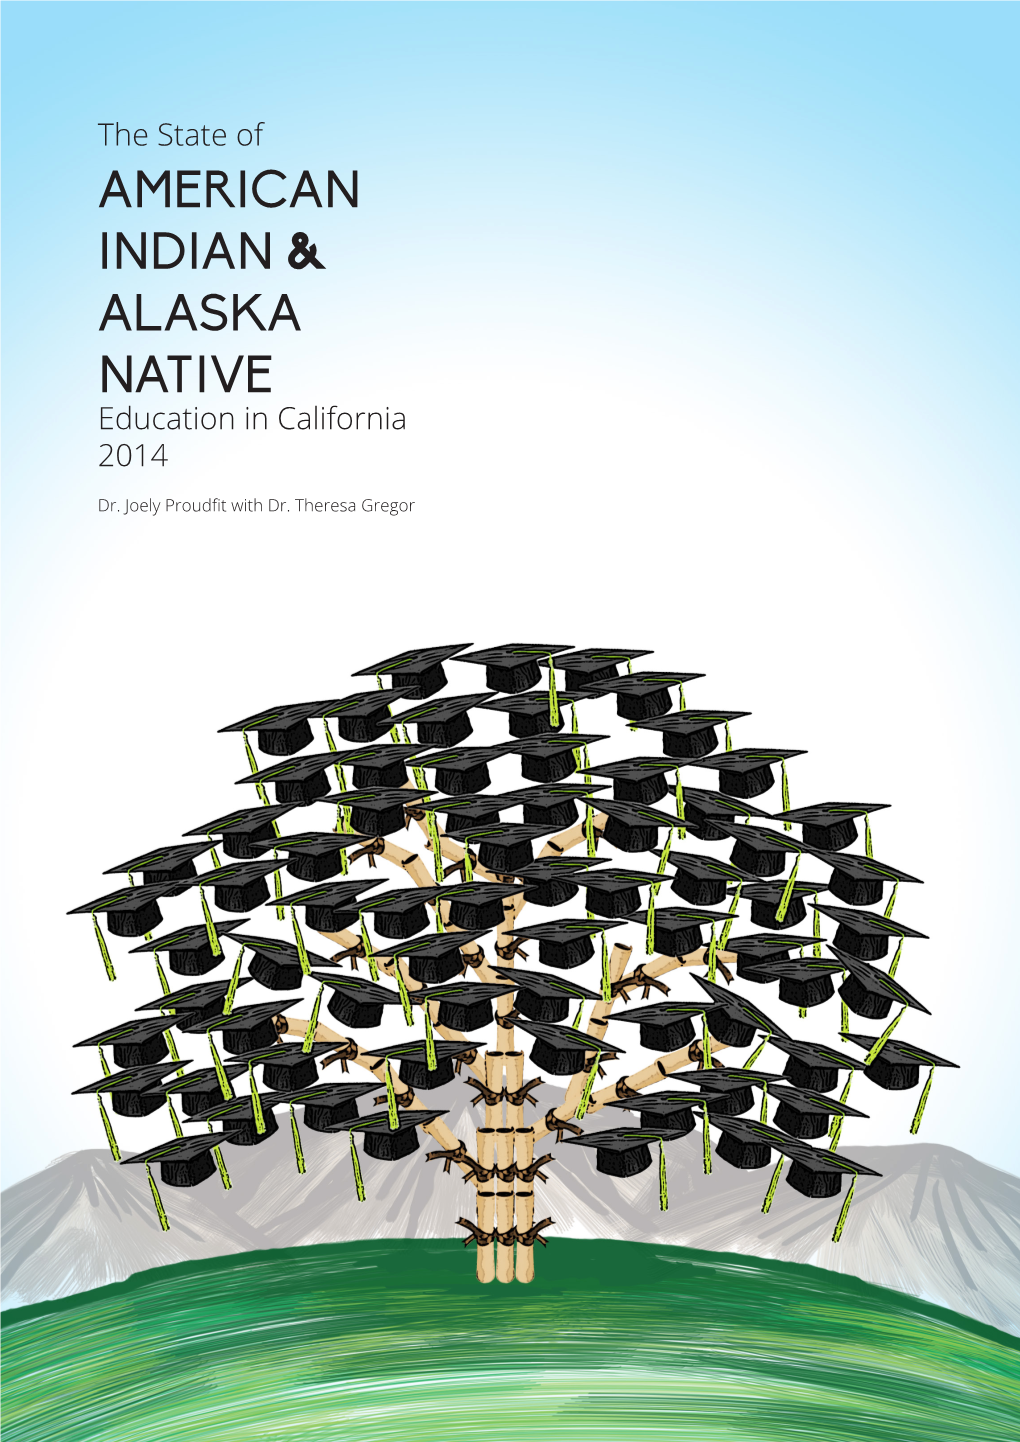 The State of AMERICAN INDIAN & ALASKA NATIVE Education in California 2014